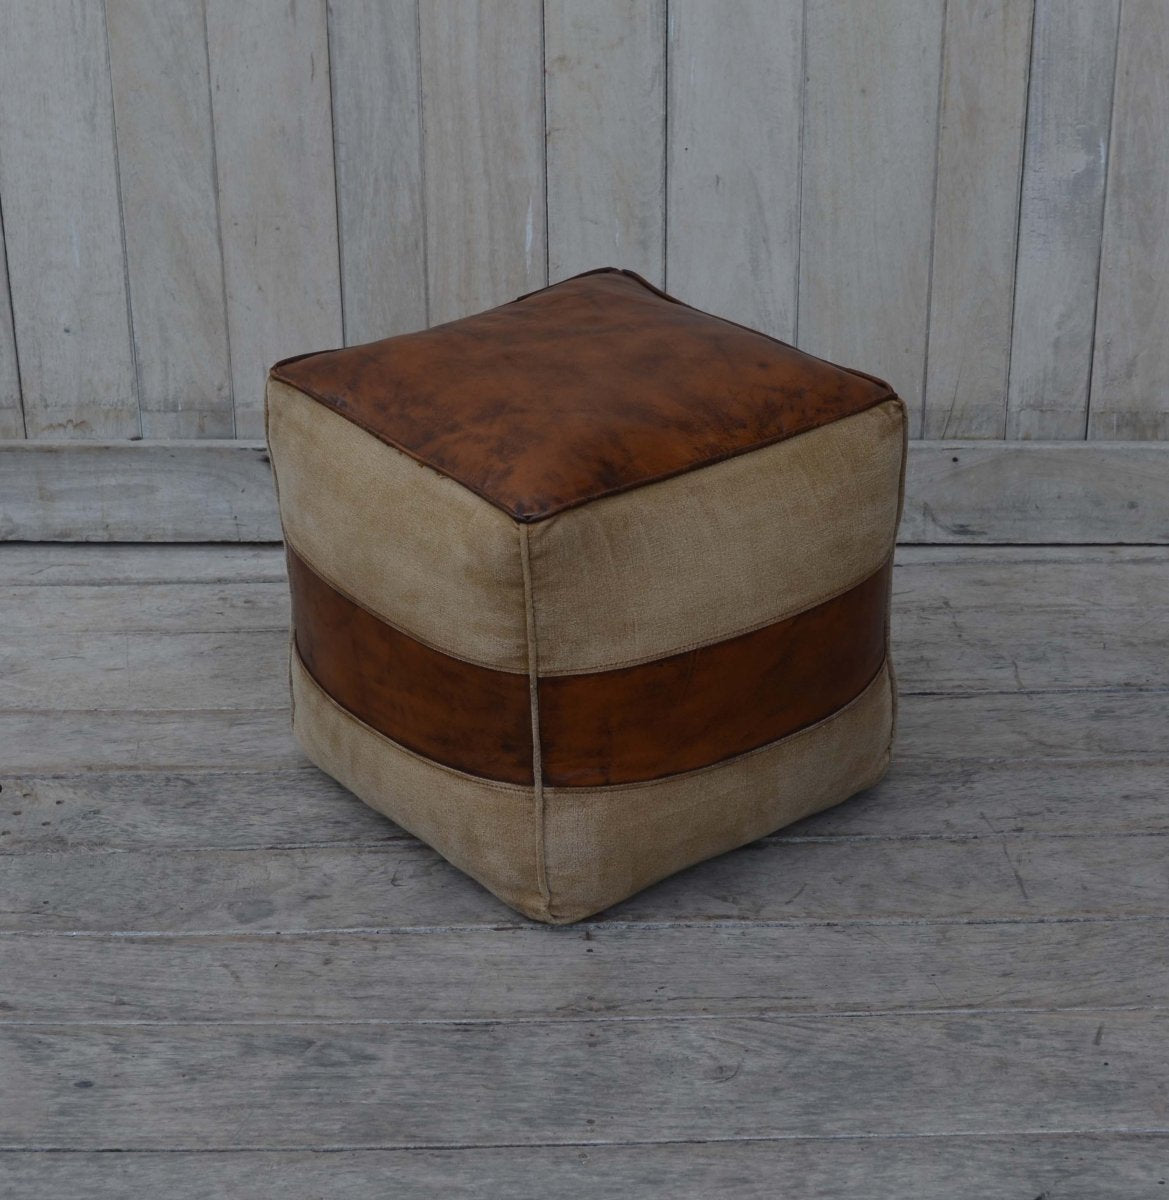 Square leather and canvas pouf - Rustic Furniture Outlet